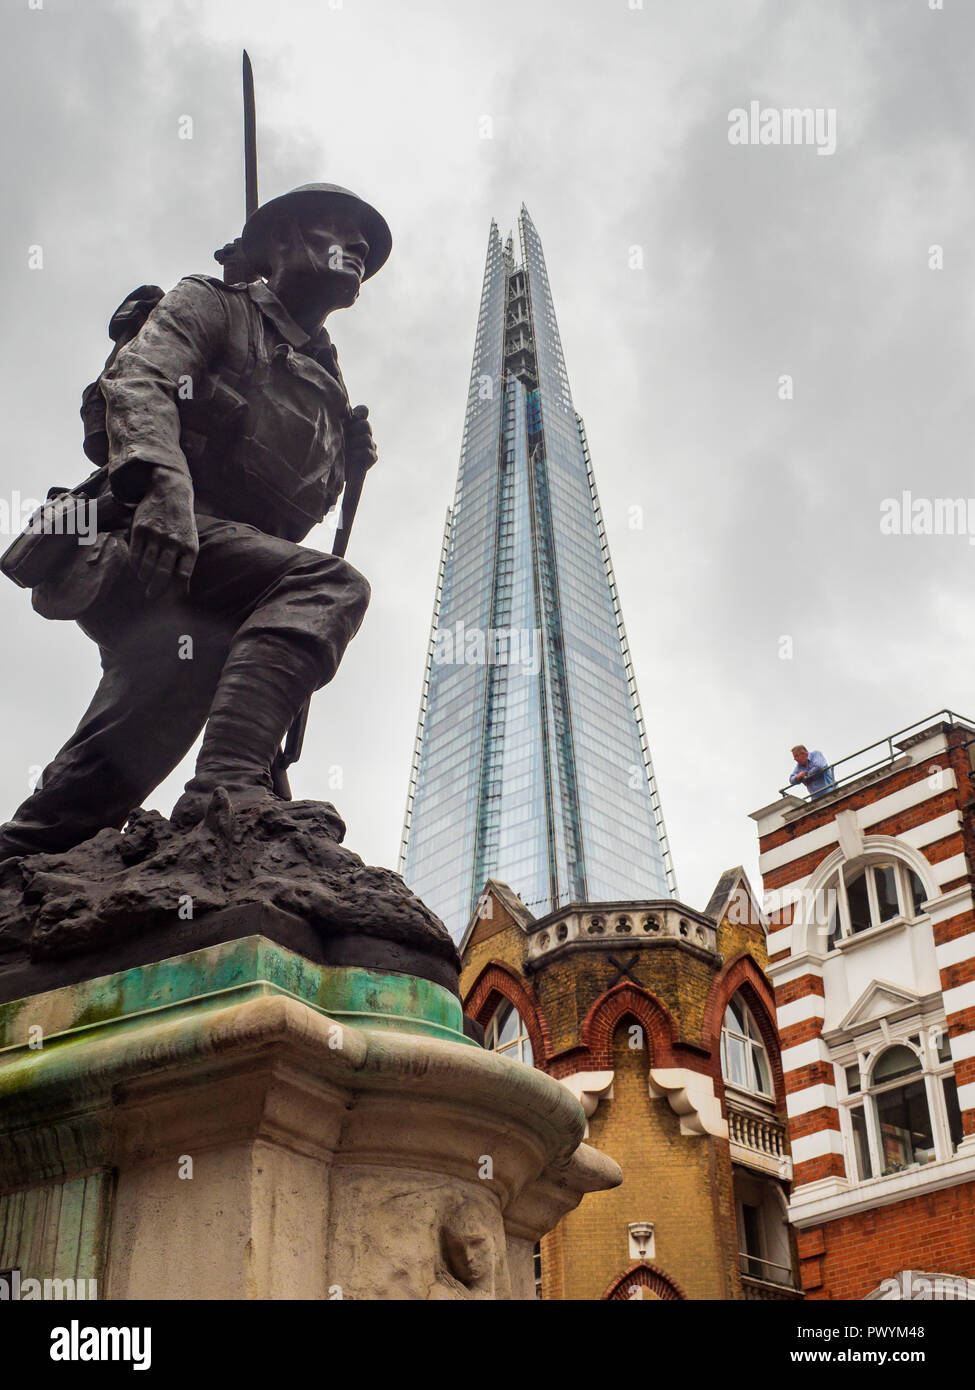 St Saviours Southwark War Memorial London> WW1 soldier with the Shard in the background Stock Photo